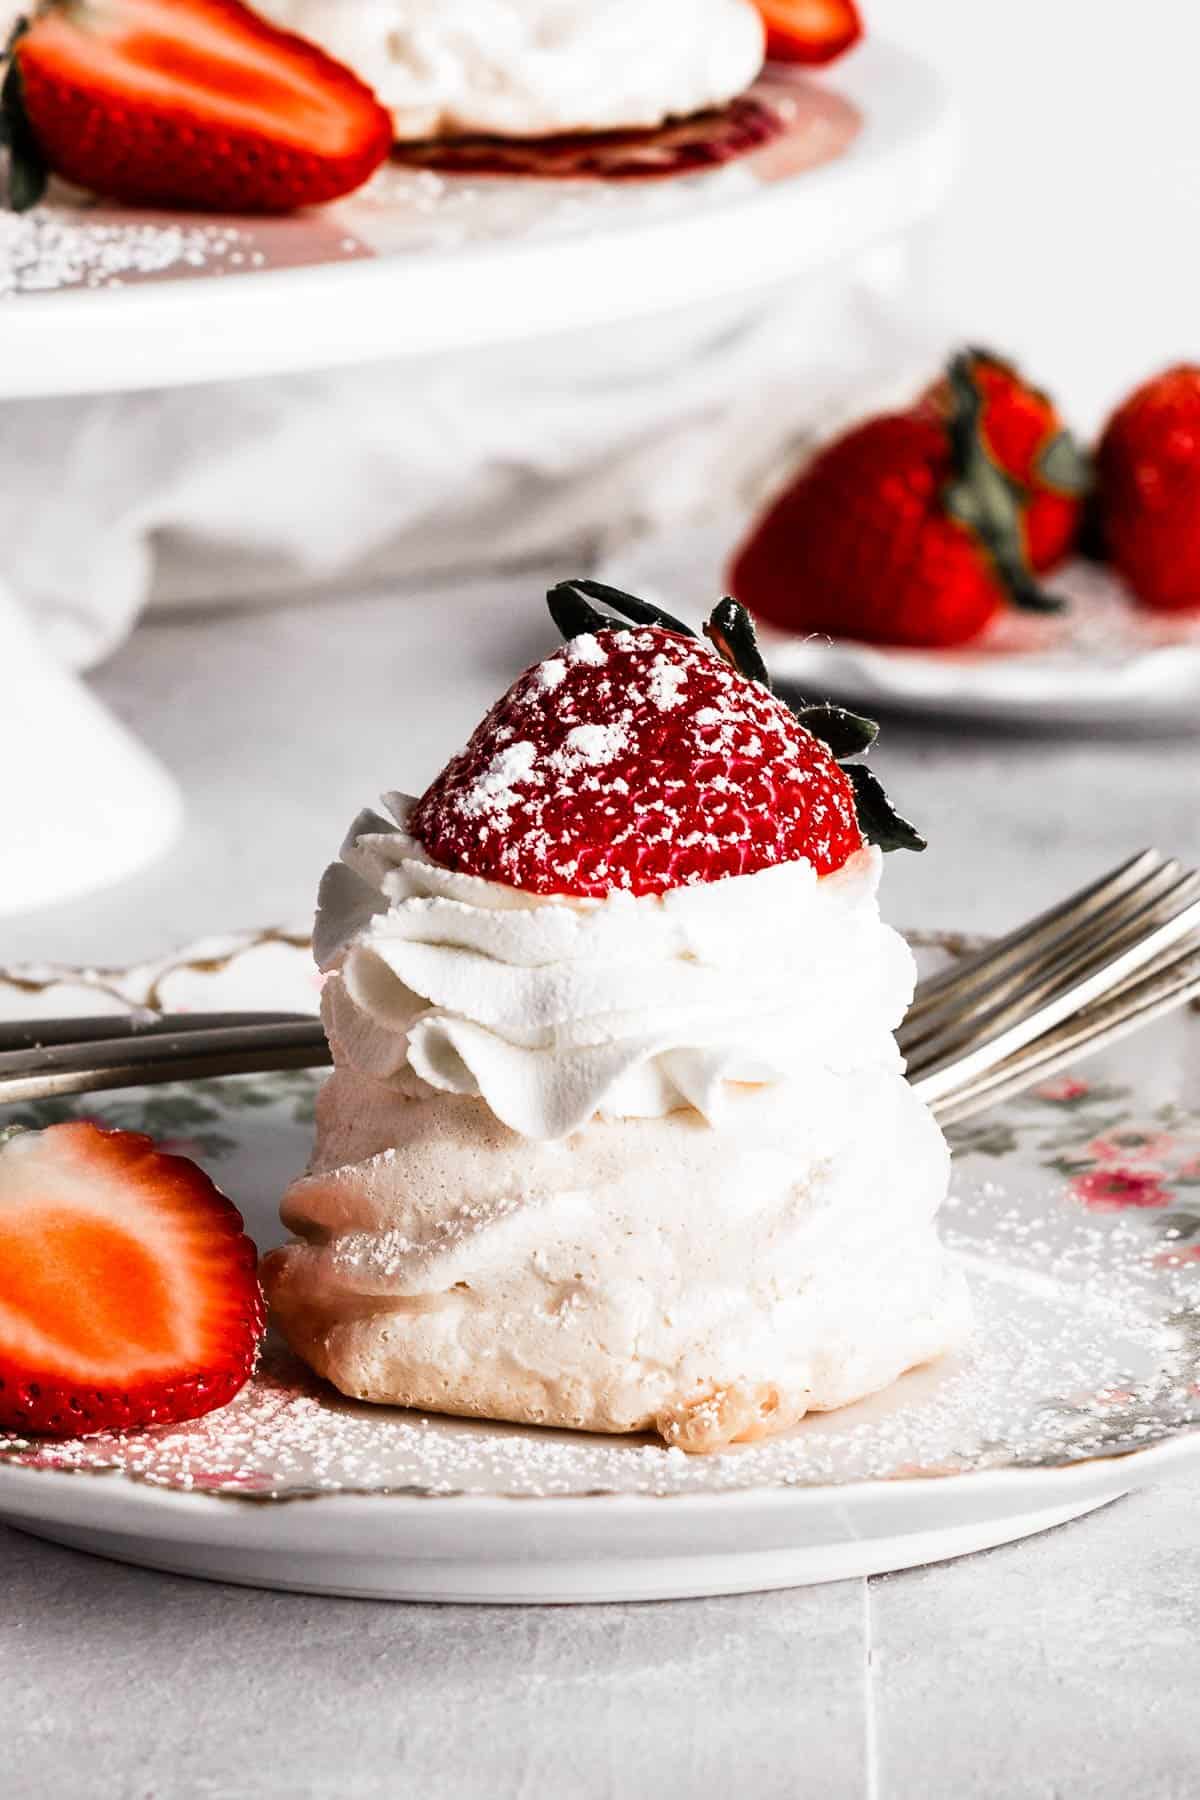 mini strawberry pavlova topped with whipped cream, strawberries, and a dust of powdered sugar